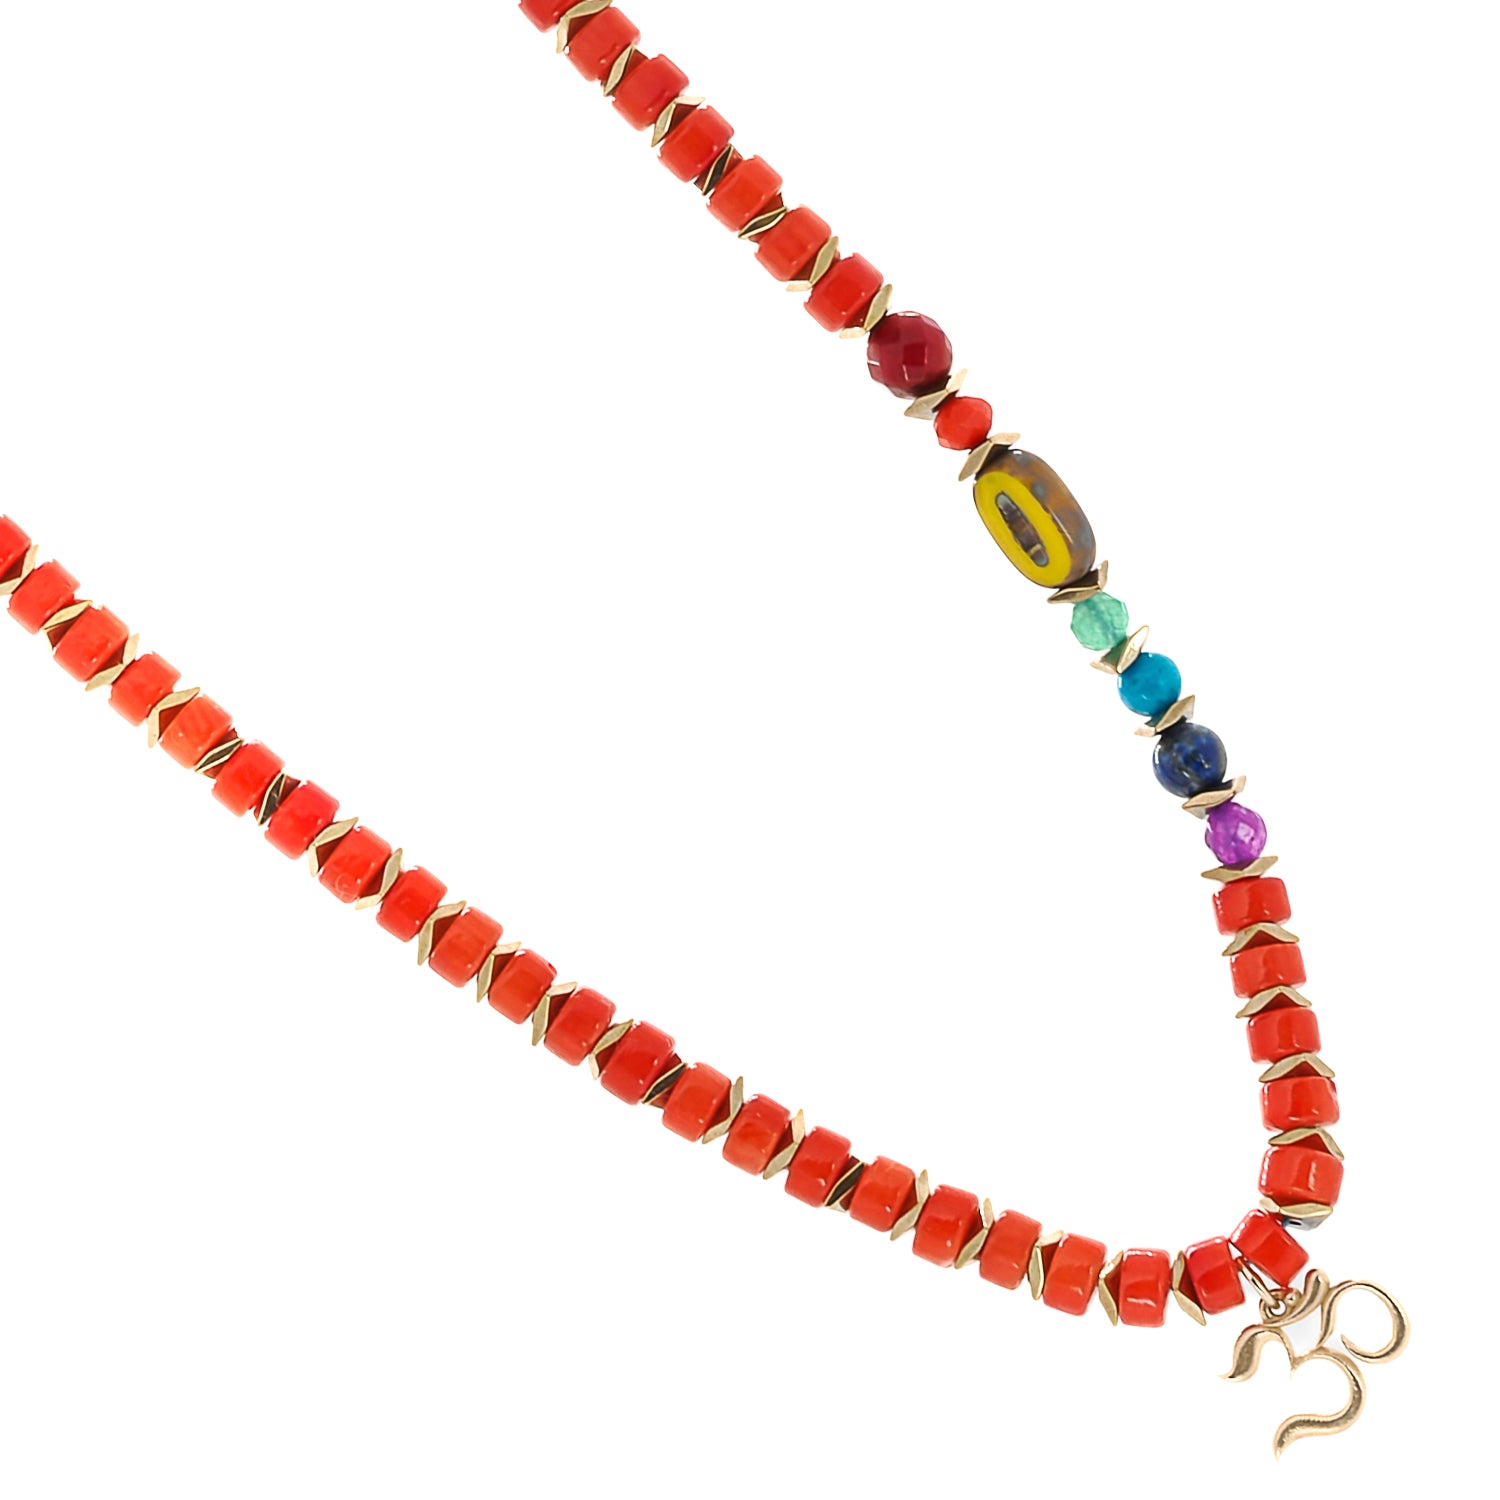 Coral stones adding a touch of vibrant red to the Chakra Necklace, symbolizing passion and vitality.